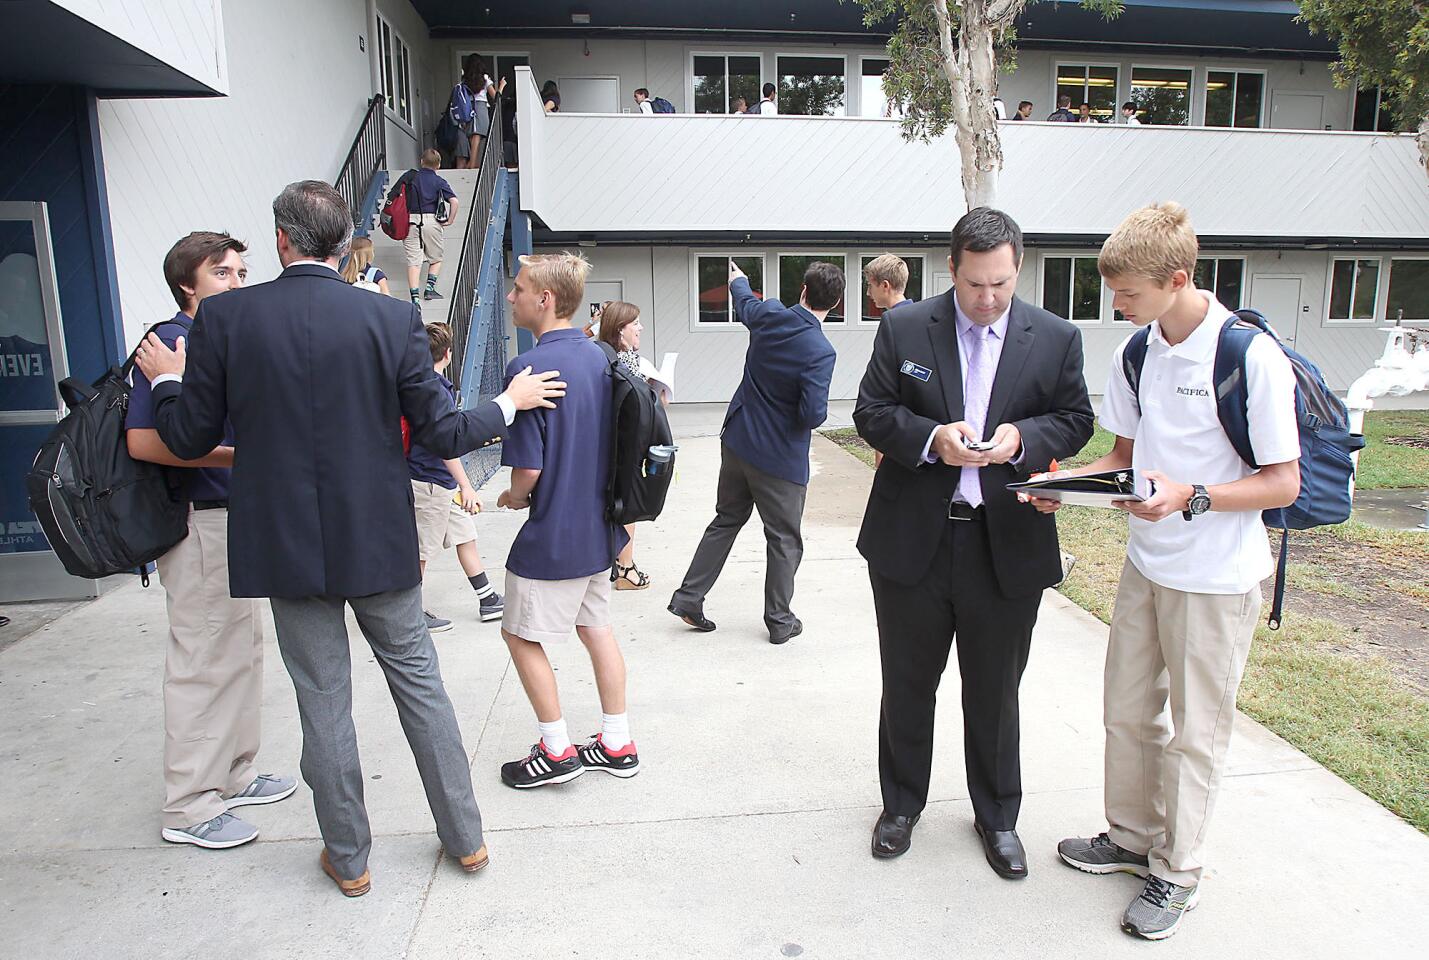 Head of School David O'Neil, left, and languages teacher Mike Arldt, right, help students navigate on the first day of school at Pacifica Christian High School in Newport Beach on Tuesday morning.